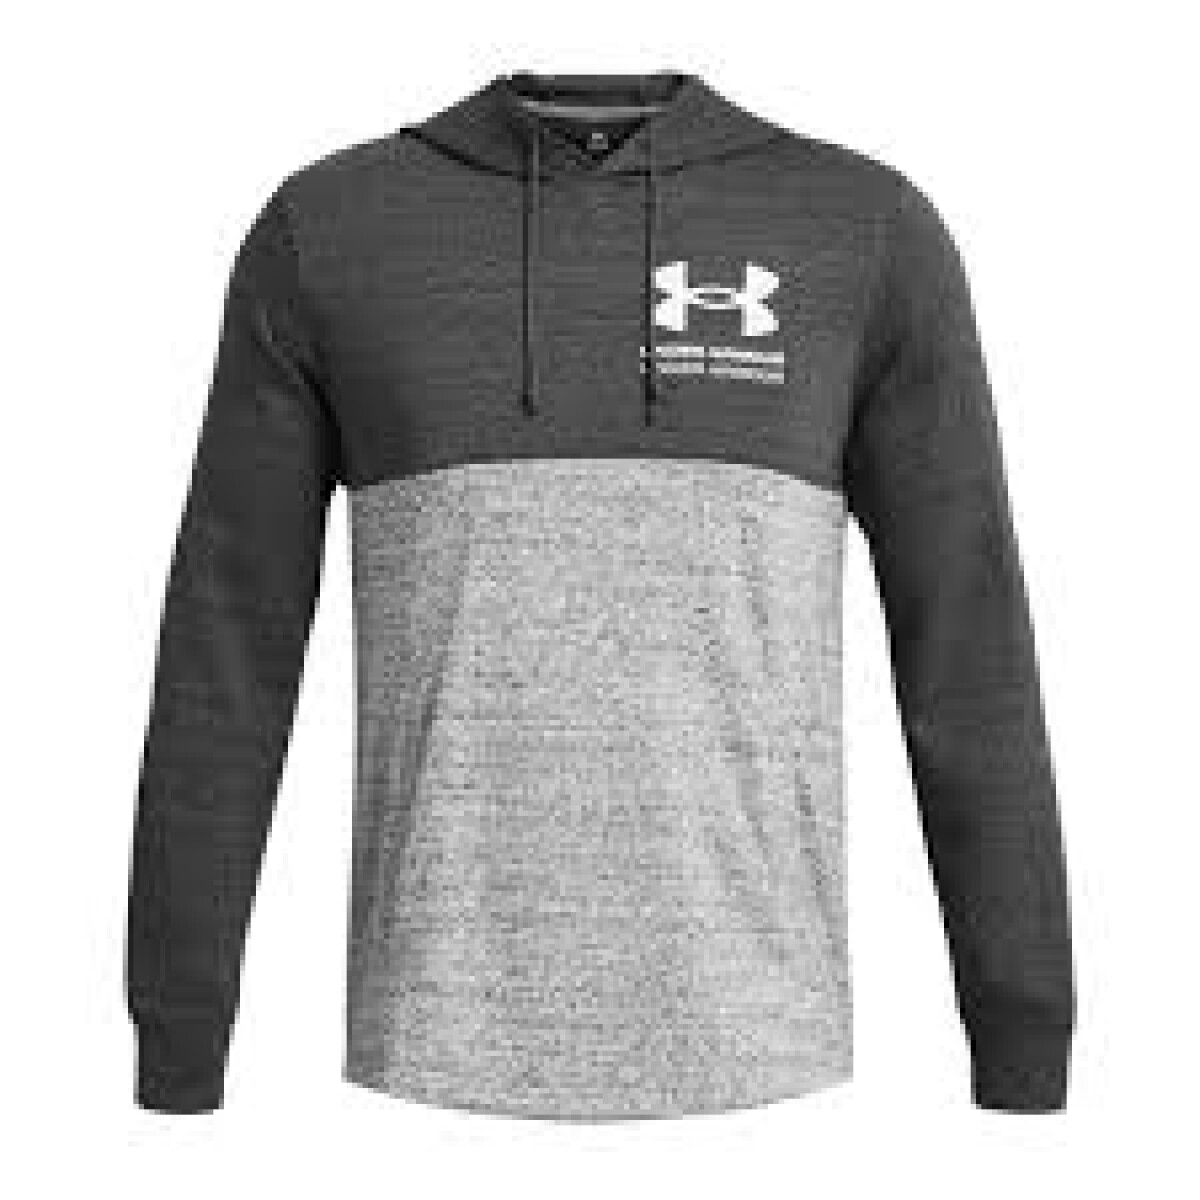 Canguro Under Armour Running Hombre Rval Trry Hd Clrblck Grey - S/C 